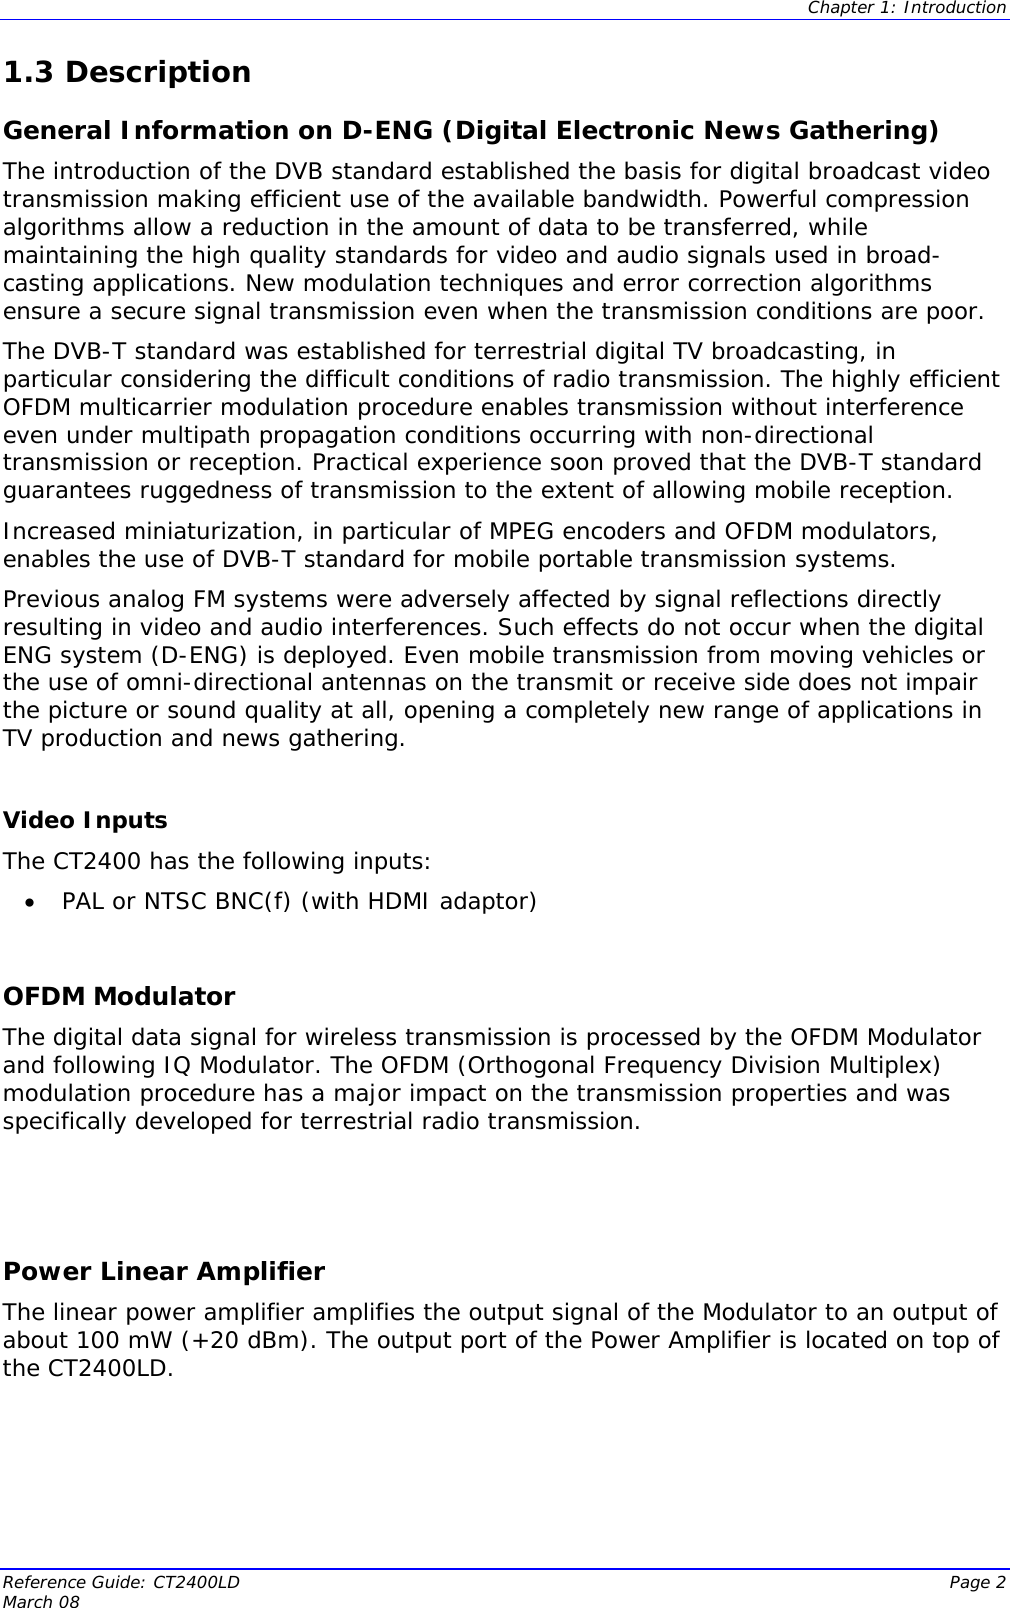  Chapter 1: Introduction Reference Guide: CT2400LD  Page 2 March 08    ideo Inputs  the following inputs: OFDM Modulator l for wireless transmission is processed by the OFDM Modulator  Power Linear Amplifier plifies the output signal of the Modulator to an output of 1.3 Description General Information on D-ENG (Digital Electronic News Gathering) The introduction of the DVB standard established the basis for digital broadcast video transmission making efficient use of the available bandwidth. Powerful compression algorithms allow a reduction in the amount of data to be transferred, while maintaining the high quality standards for video and audio signals used in broad-casting applications. New modulation techniques and error correction algorithms ensure a secure signal transmission even when the transmission conditions are poor. The DVB-T standard was established for terrestrial digital TV broadcasting, in particular considering the difficult conditions of radio transmission. The highly efficient OFDM multicarrier modulation procedure enables transmission without interference even under multipath propagation conditions occurring with non-directional transmission or reception. Practical experience soon proved that the DVB-T standard guarantees ruggedness of transmission to the extent of allowing mobile reception. Increased miniaturization, in particular of MPEG encoders and OFDM modulators, enables the use of DVB-T standard for mobile portable transmission systems.  Previous analog FM systems were adversely affected by signal reflections directly resulting in video and audio interferences. Such effects do not occur when the digital ENG system (D-ENG) is deployed. Even mobile transmission from moving vehicles or the use of omni-directional antennas on the transmit or receive side does not impair the picture or sound quality at all, opening a completely new range of applications in TV production and news gathering.  VThe CT2400 has• PAL or NTSC BNC(f) (with HDMI adaptor)  The digital data signaand following IQ Modulator. The OFDM (Orthogonal Frequency Division Multiplex) modulation procedure has a major impact on the transmission properties and was specifically developed for terrestrial radio transmission.  The linear power amplifier amabout 100 mW (+20 dBm). The output port of the Power Amplifier is located on top of the CT2400LD.  